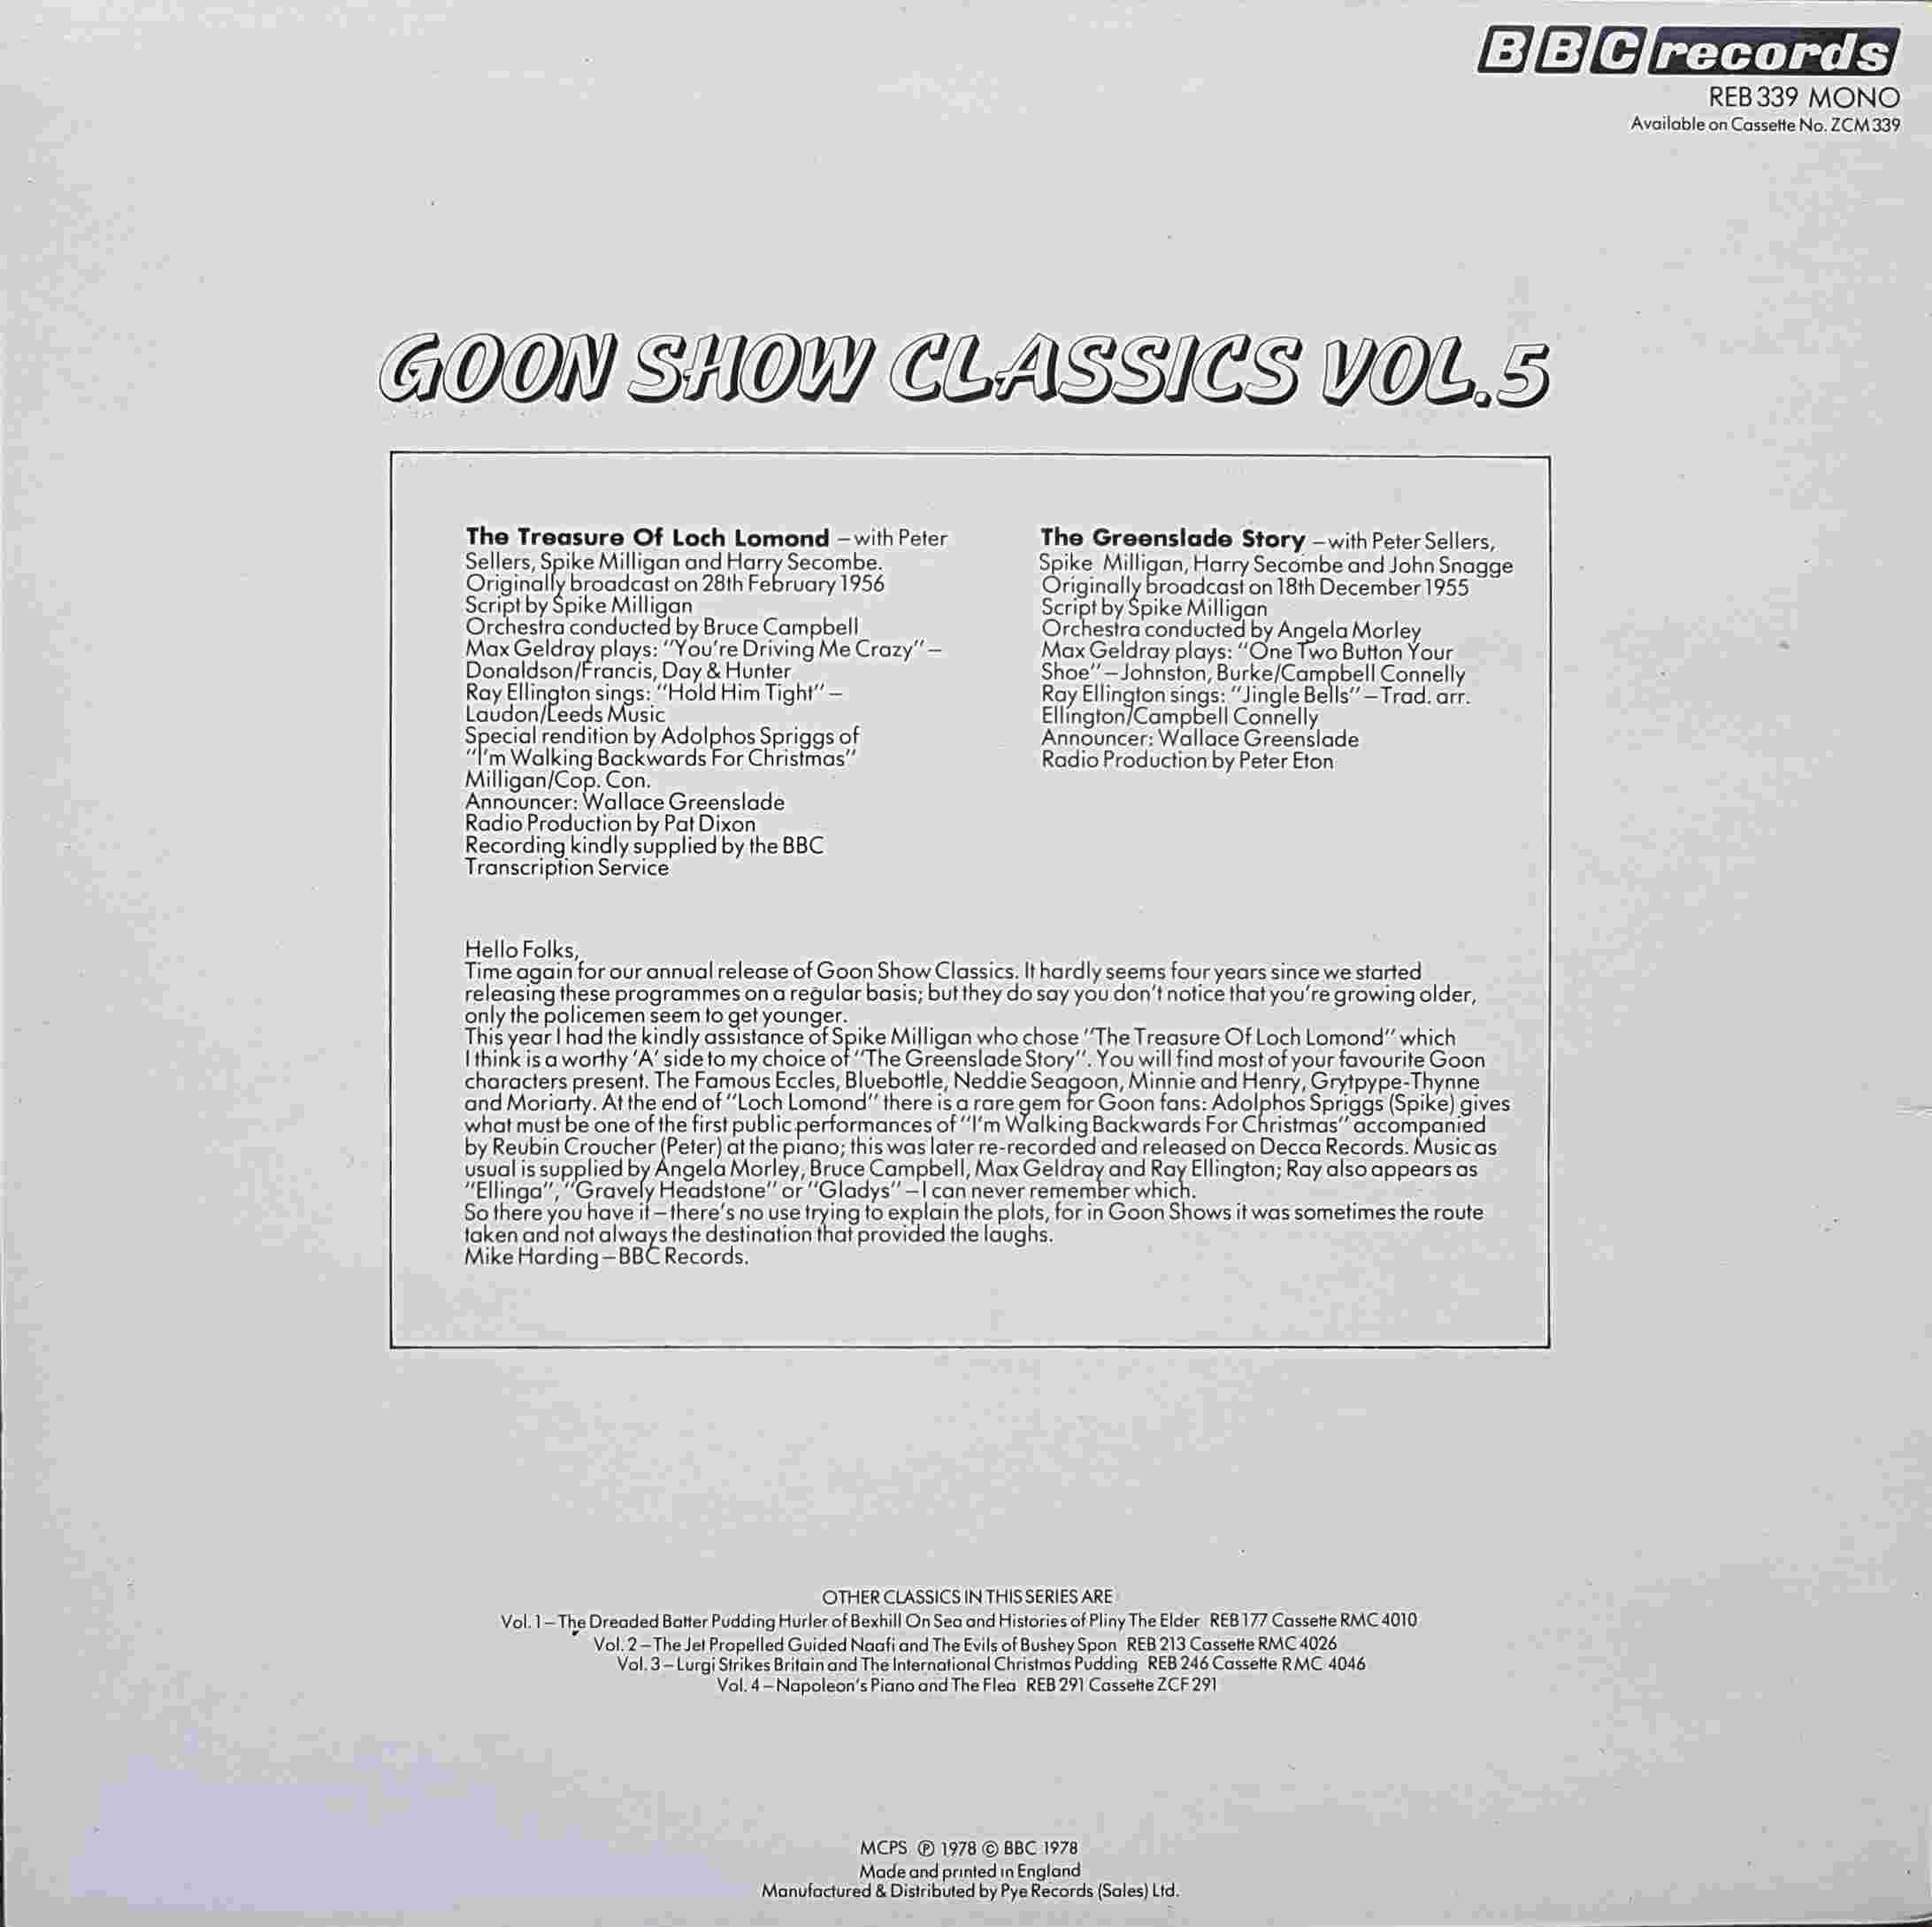 Picture of REB 339 Goon show classics - Volume 5 by artist Spike Milligan from the BBC records and Tapes library